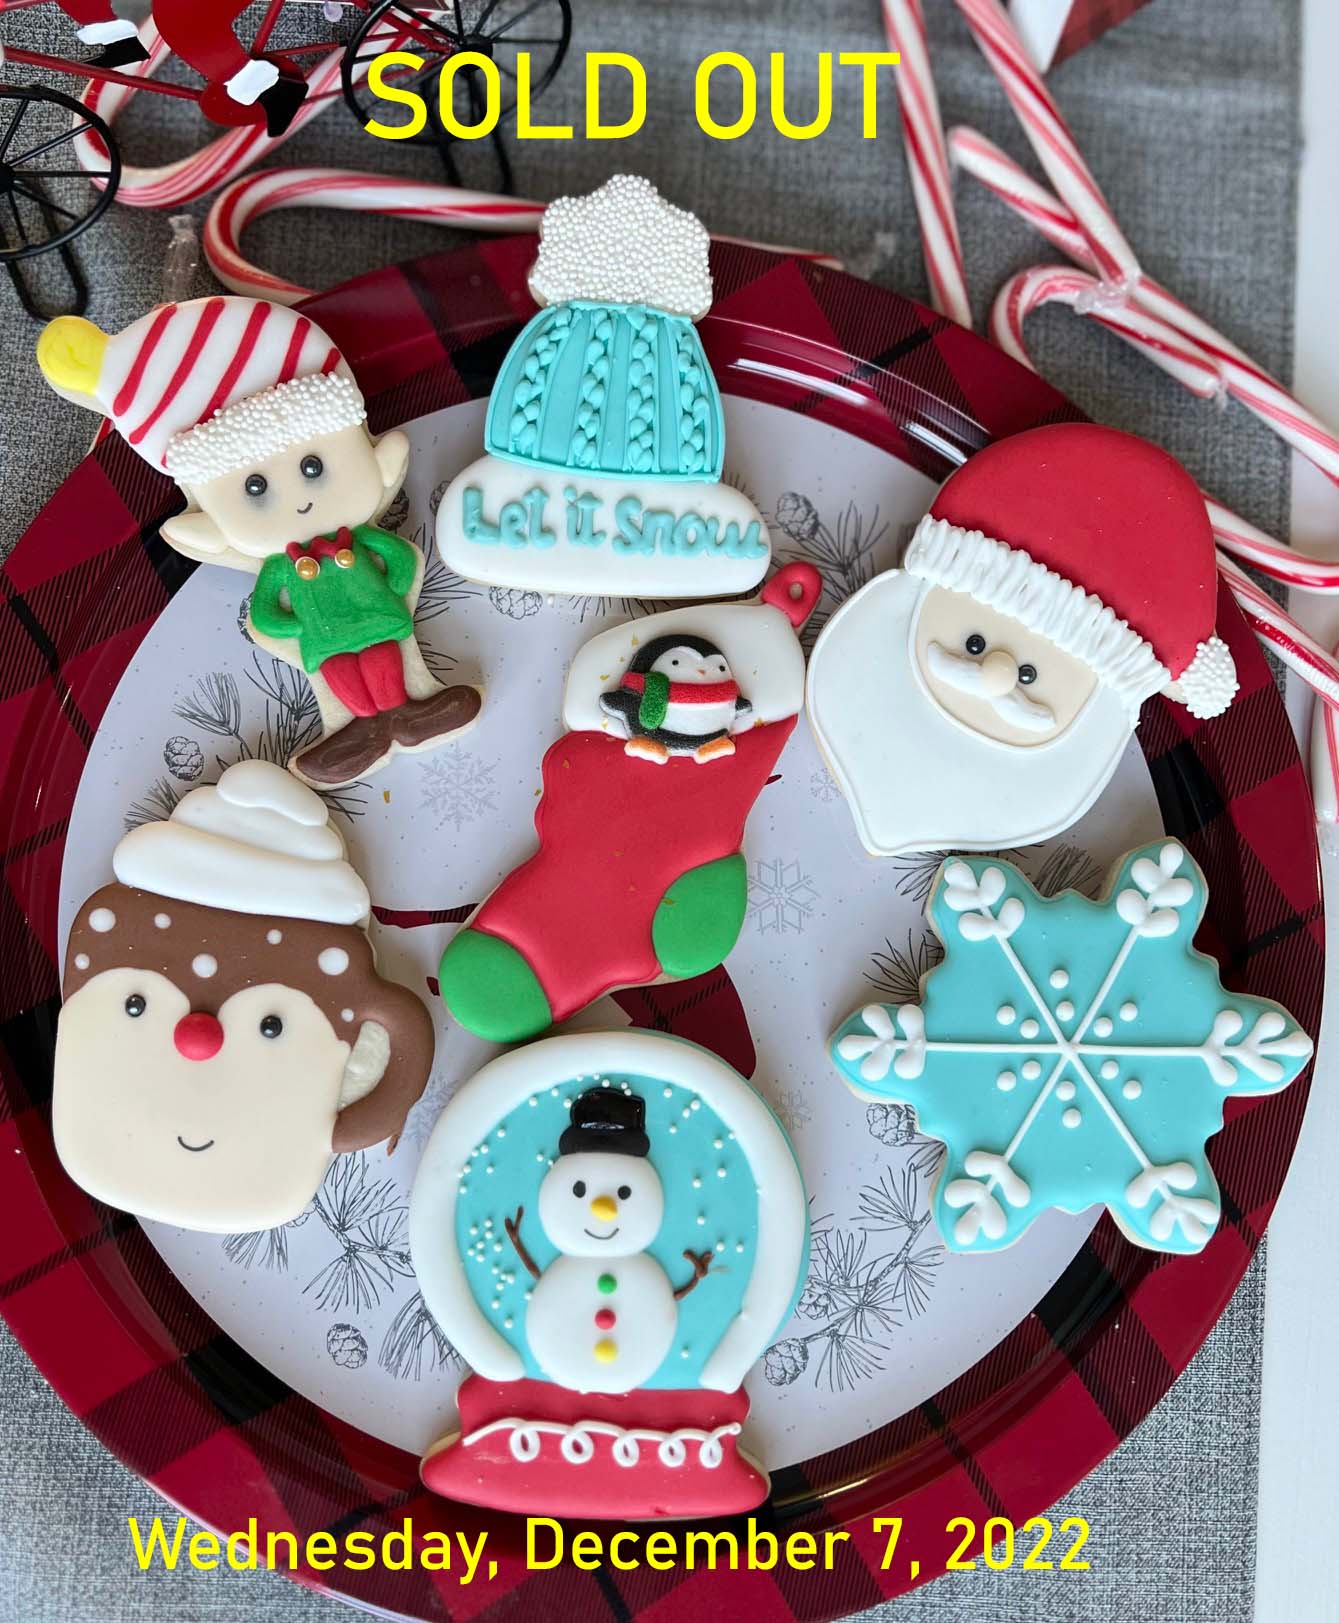 Wednesday 12/7/2022: Sugar Cookie Decorating class - Christmas Theme (Please read class details below)